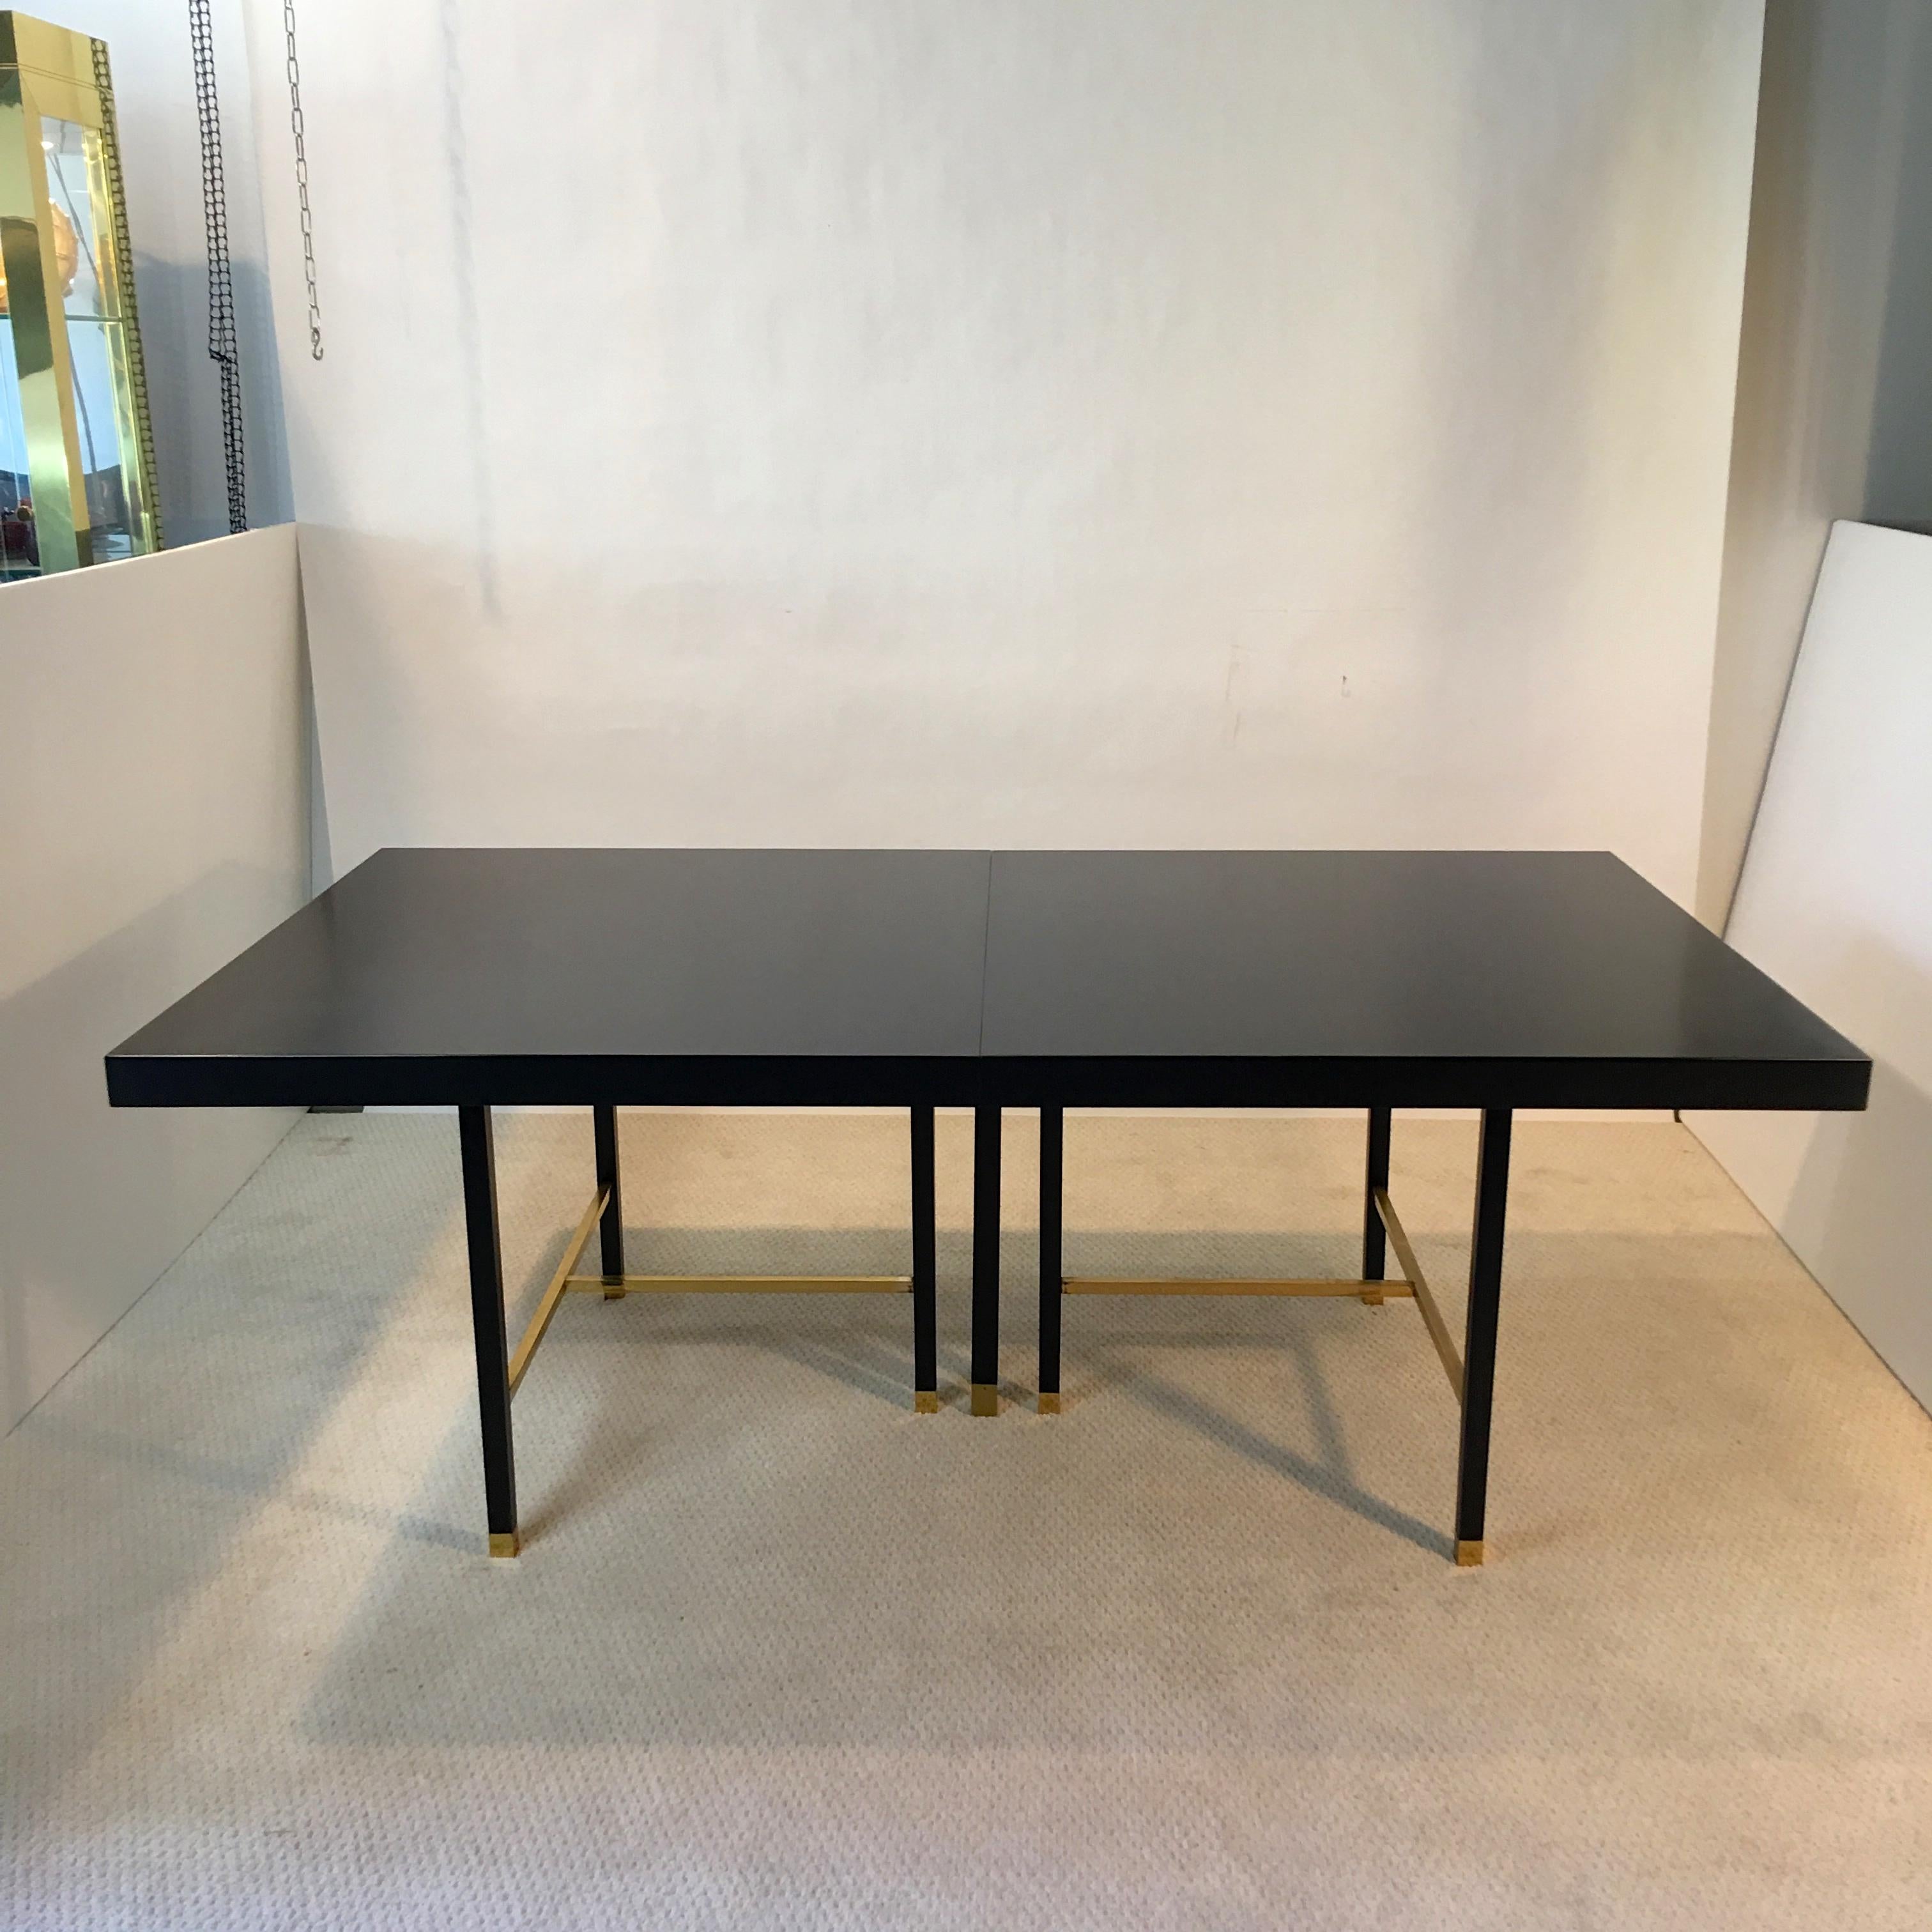 Magnificent minimalist design on a grand scale, ebonized mahogany dining table designed and produced by Harvey Probber, circa 1968 with solid brass square bar cross-stretchers and square leg sabots on seven legs, creating a striking profile both